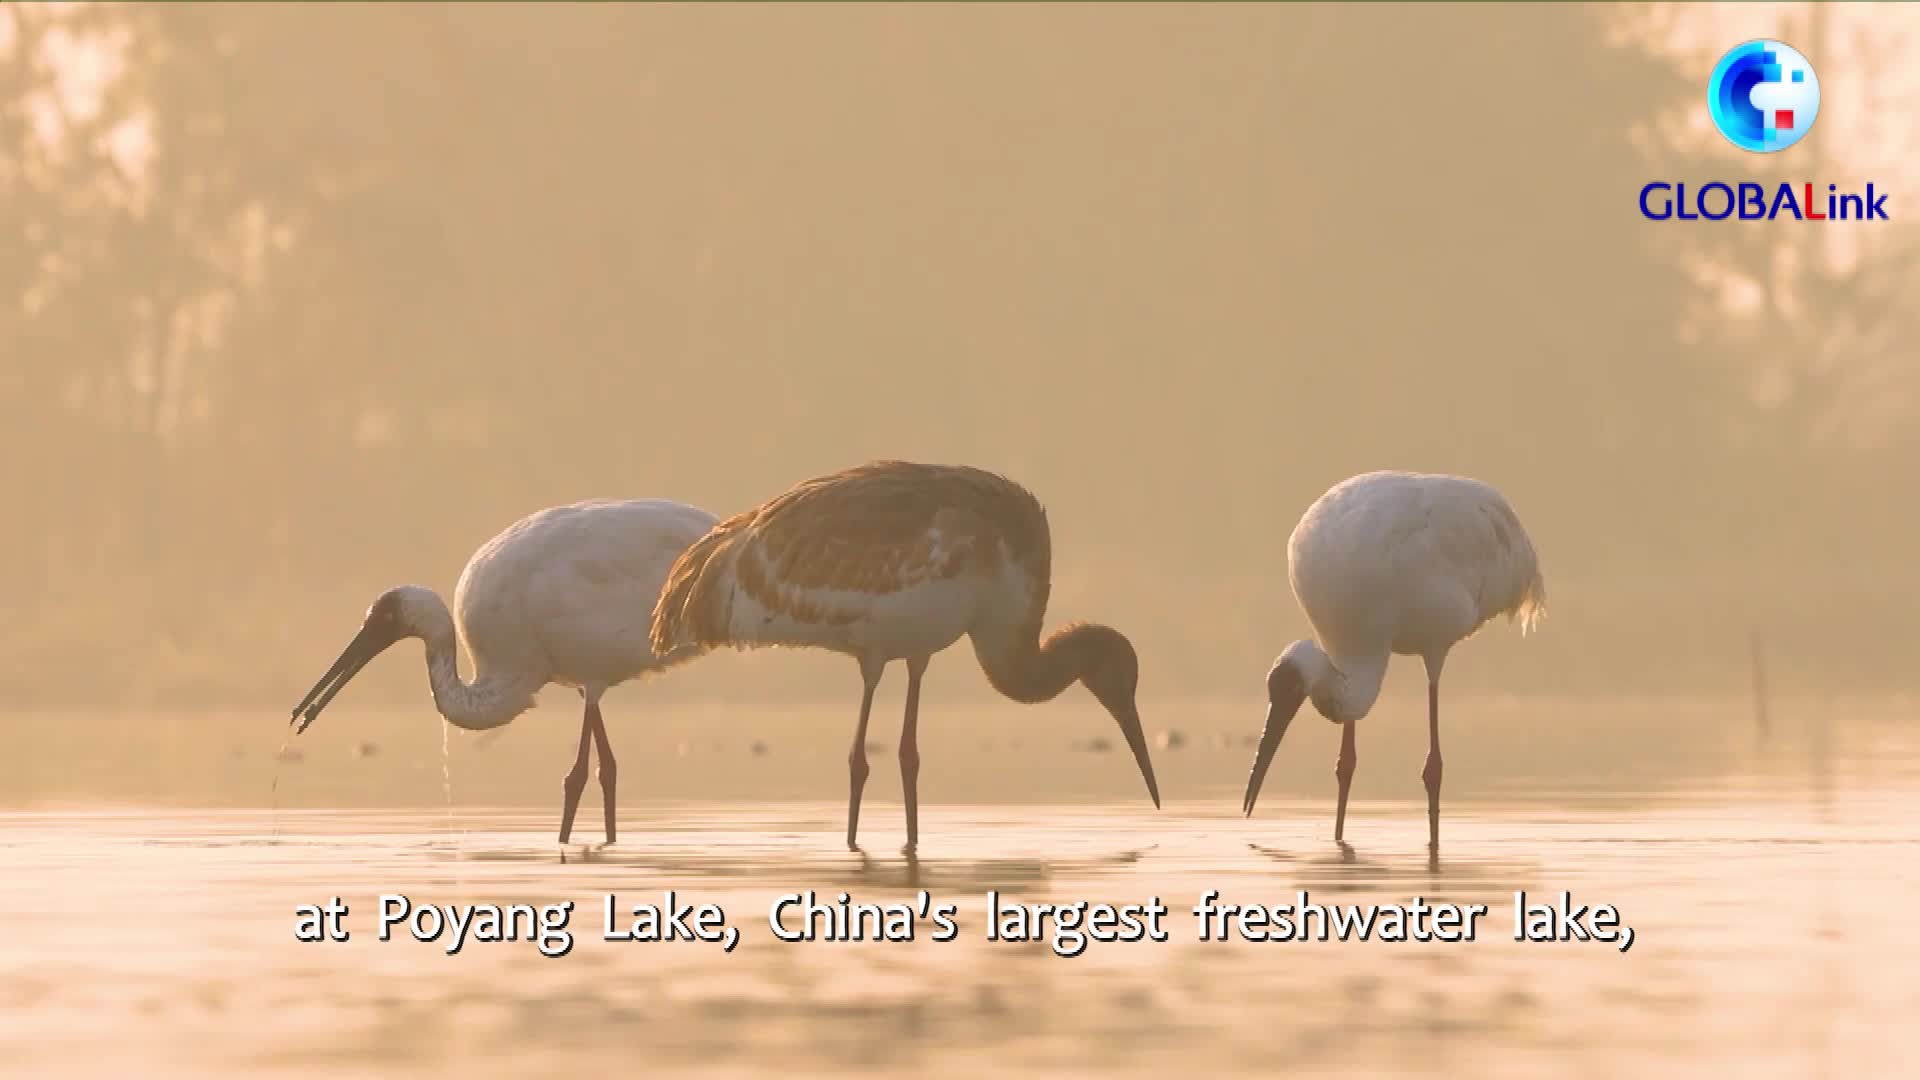 GLOBALink | Foreign envoys "date" with migratory birds at China's largest freshwater lake